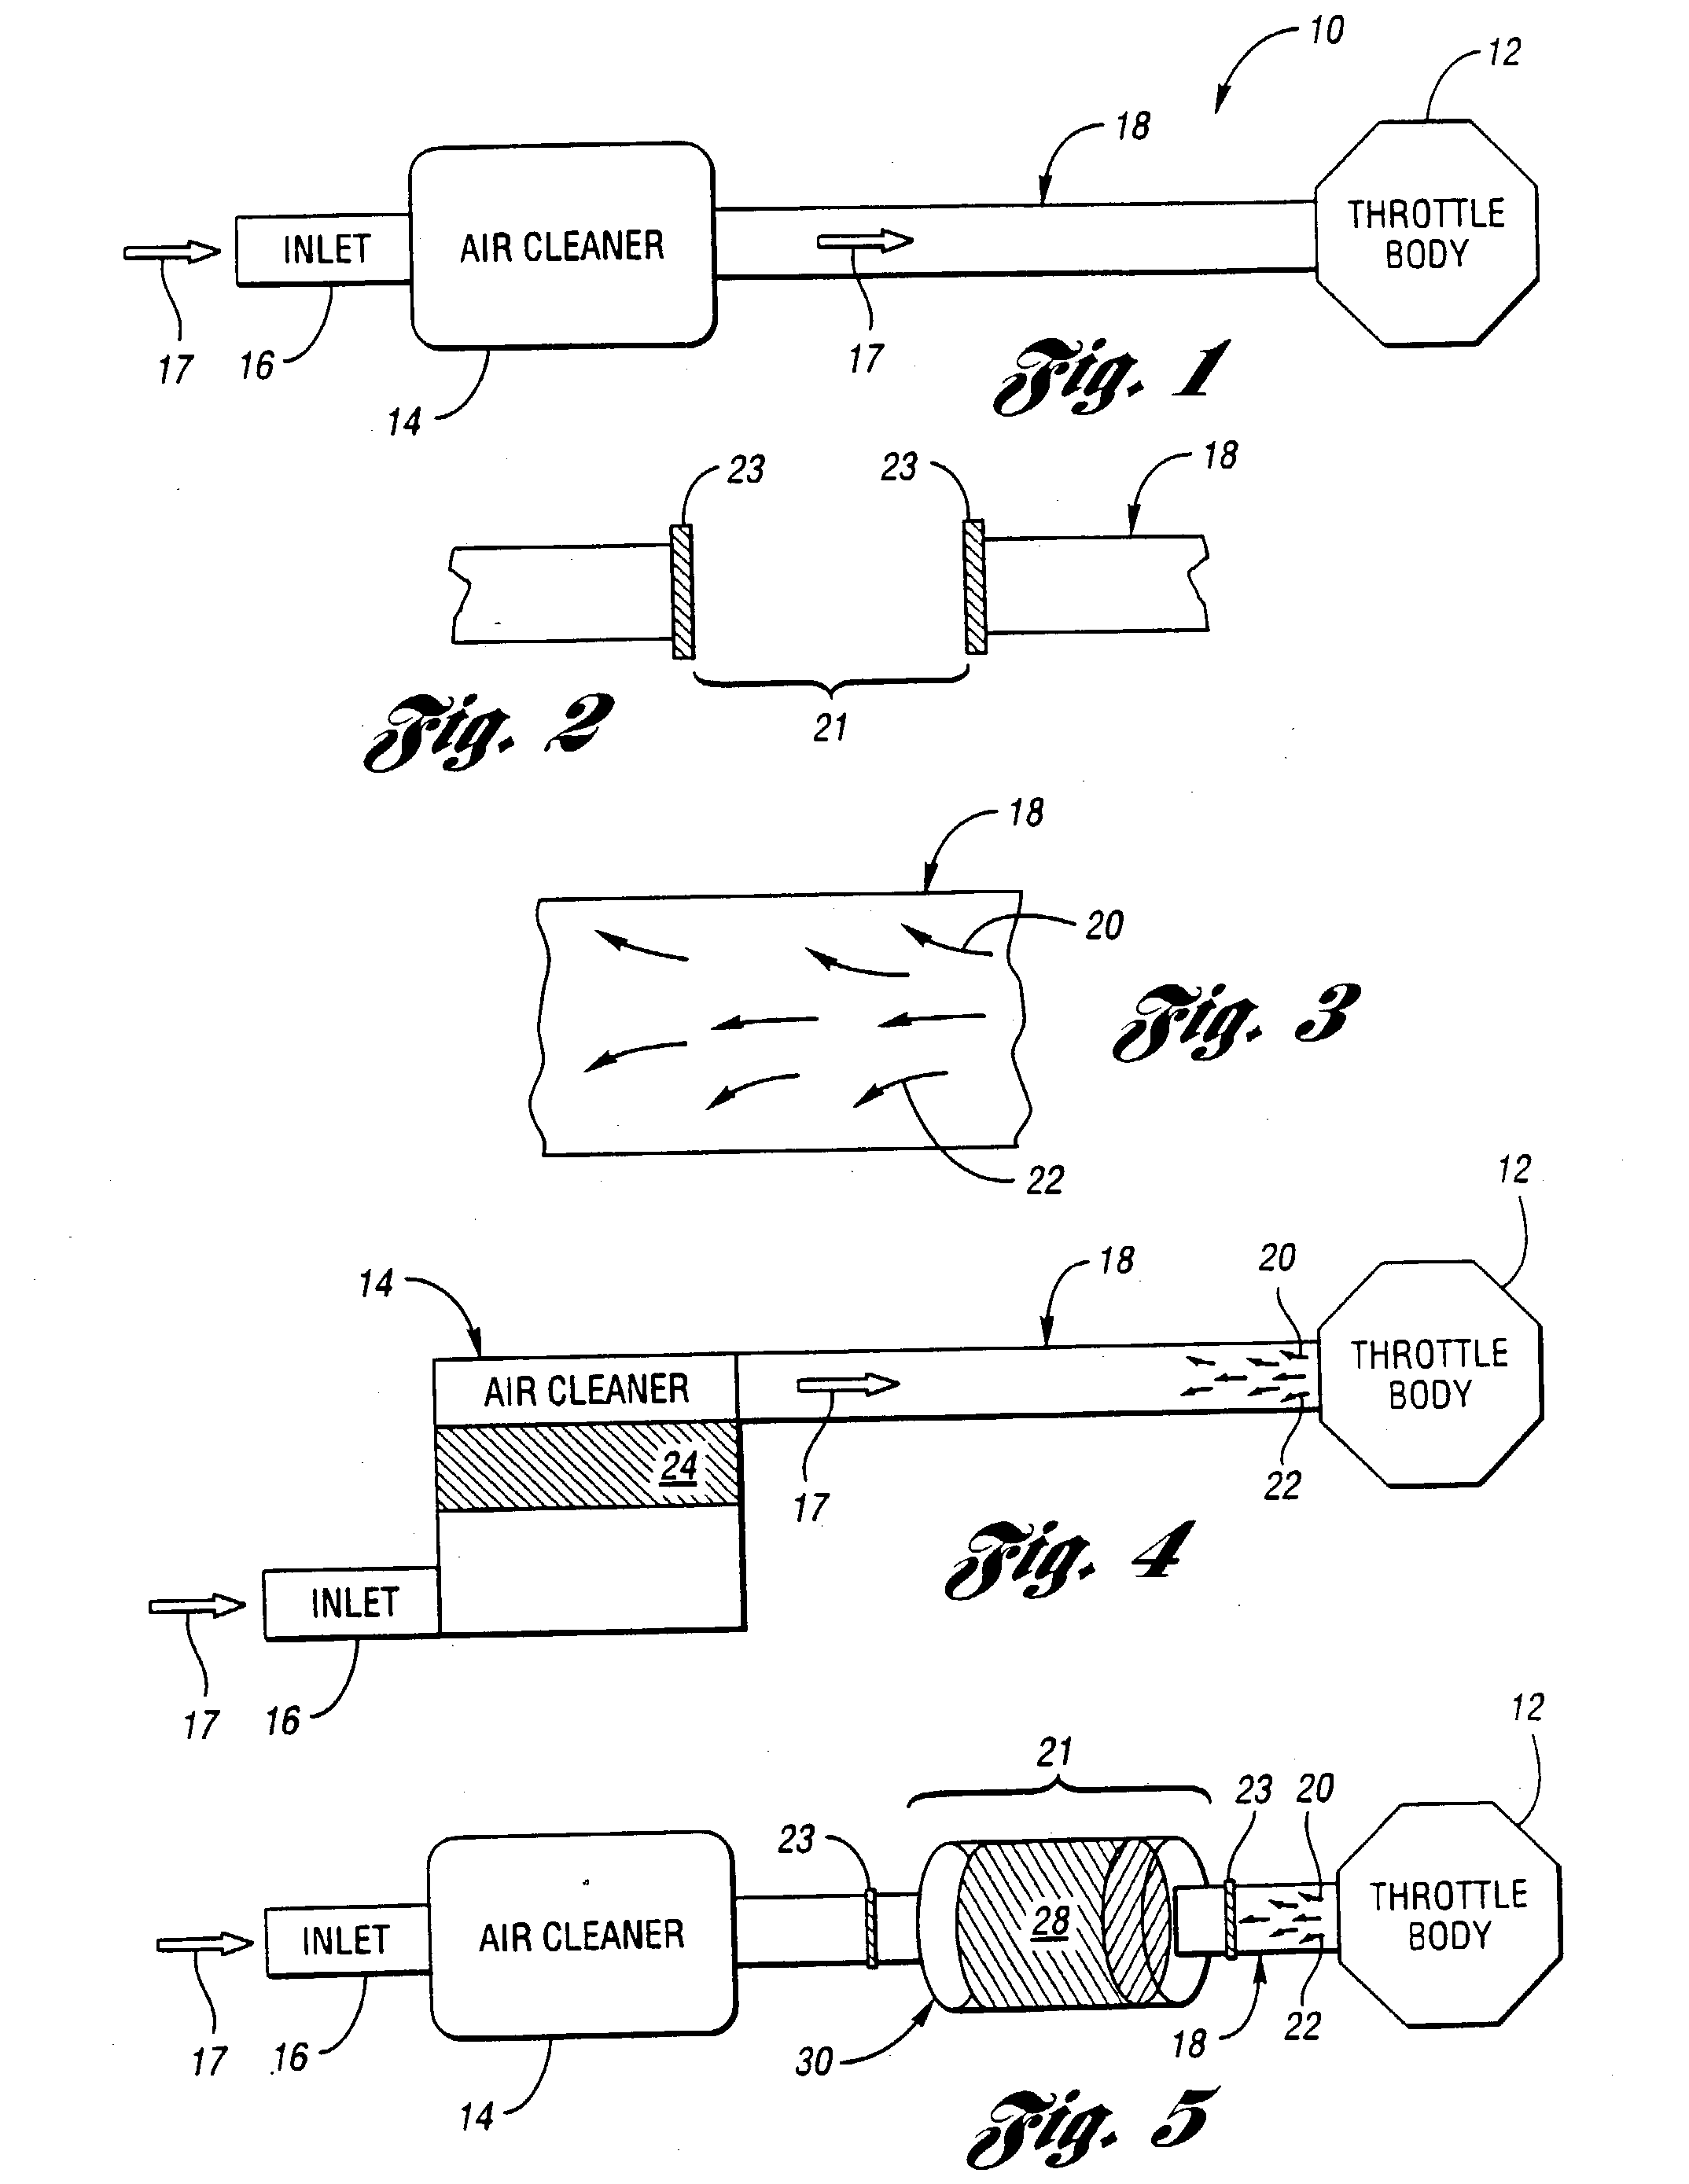 System and method for capturing hydrocarbon emissions diffusing from an air induction system